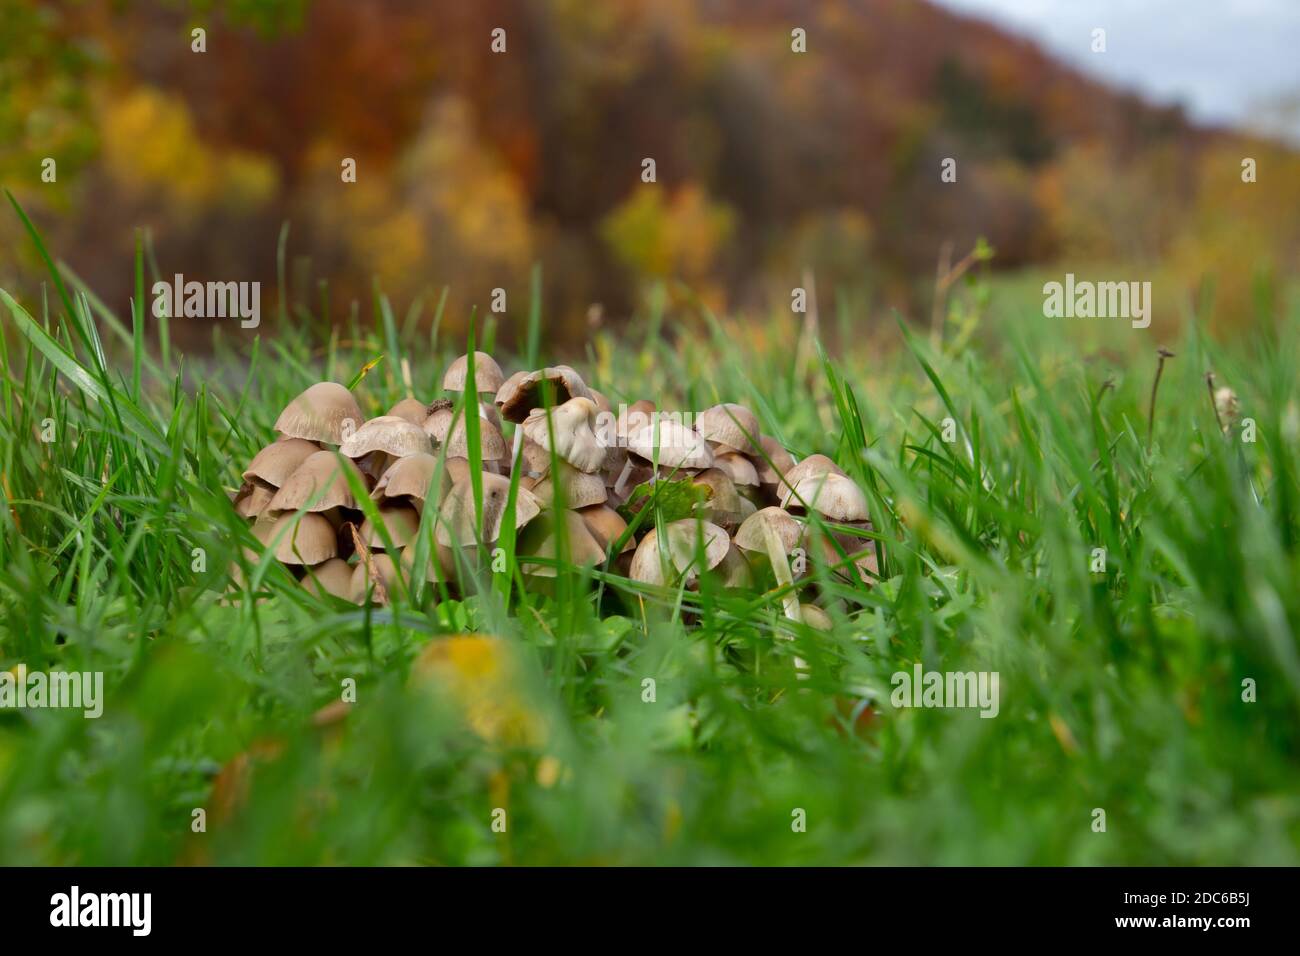 Close up of a group of many Mycena mushrooms growing in the grass Stock Photo